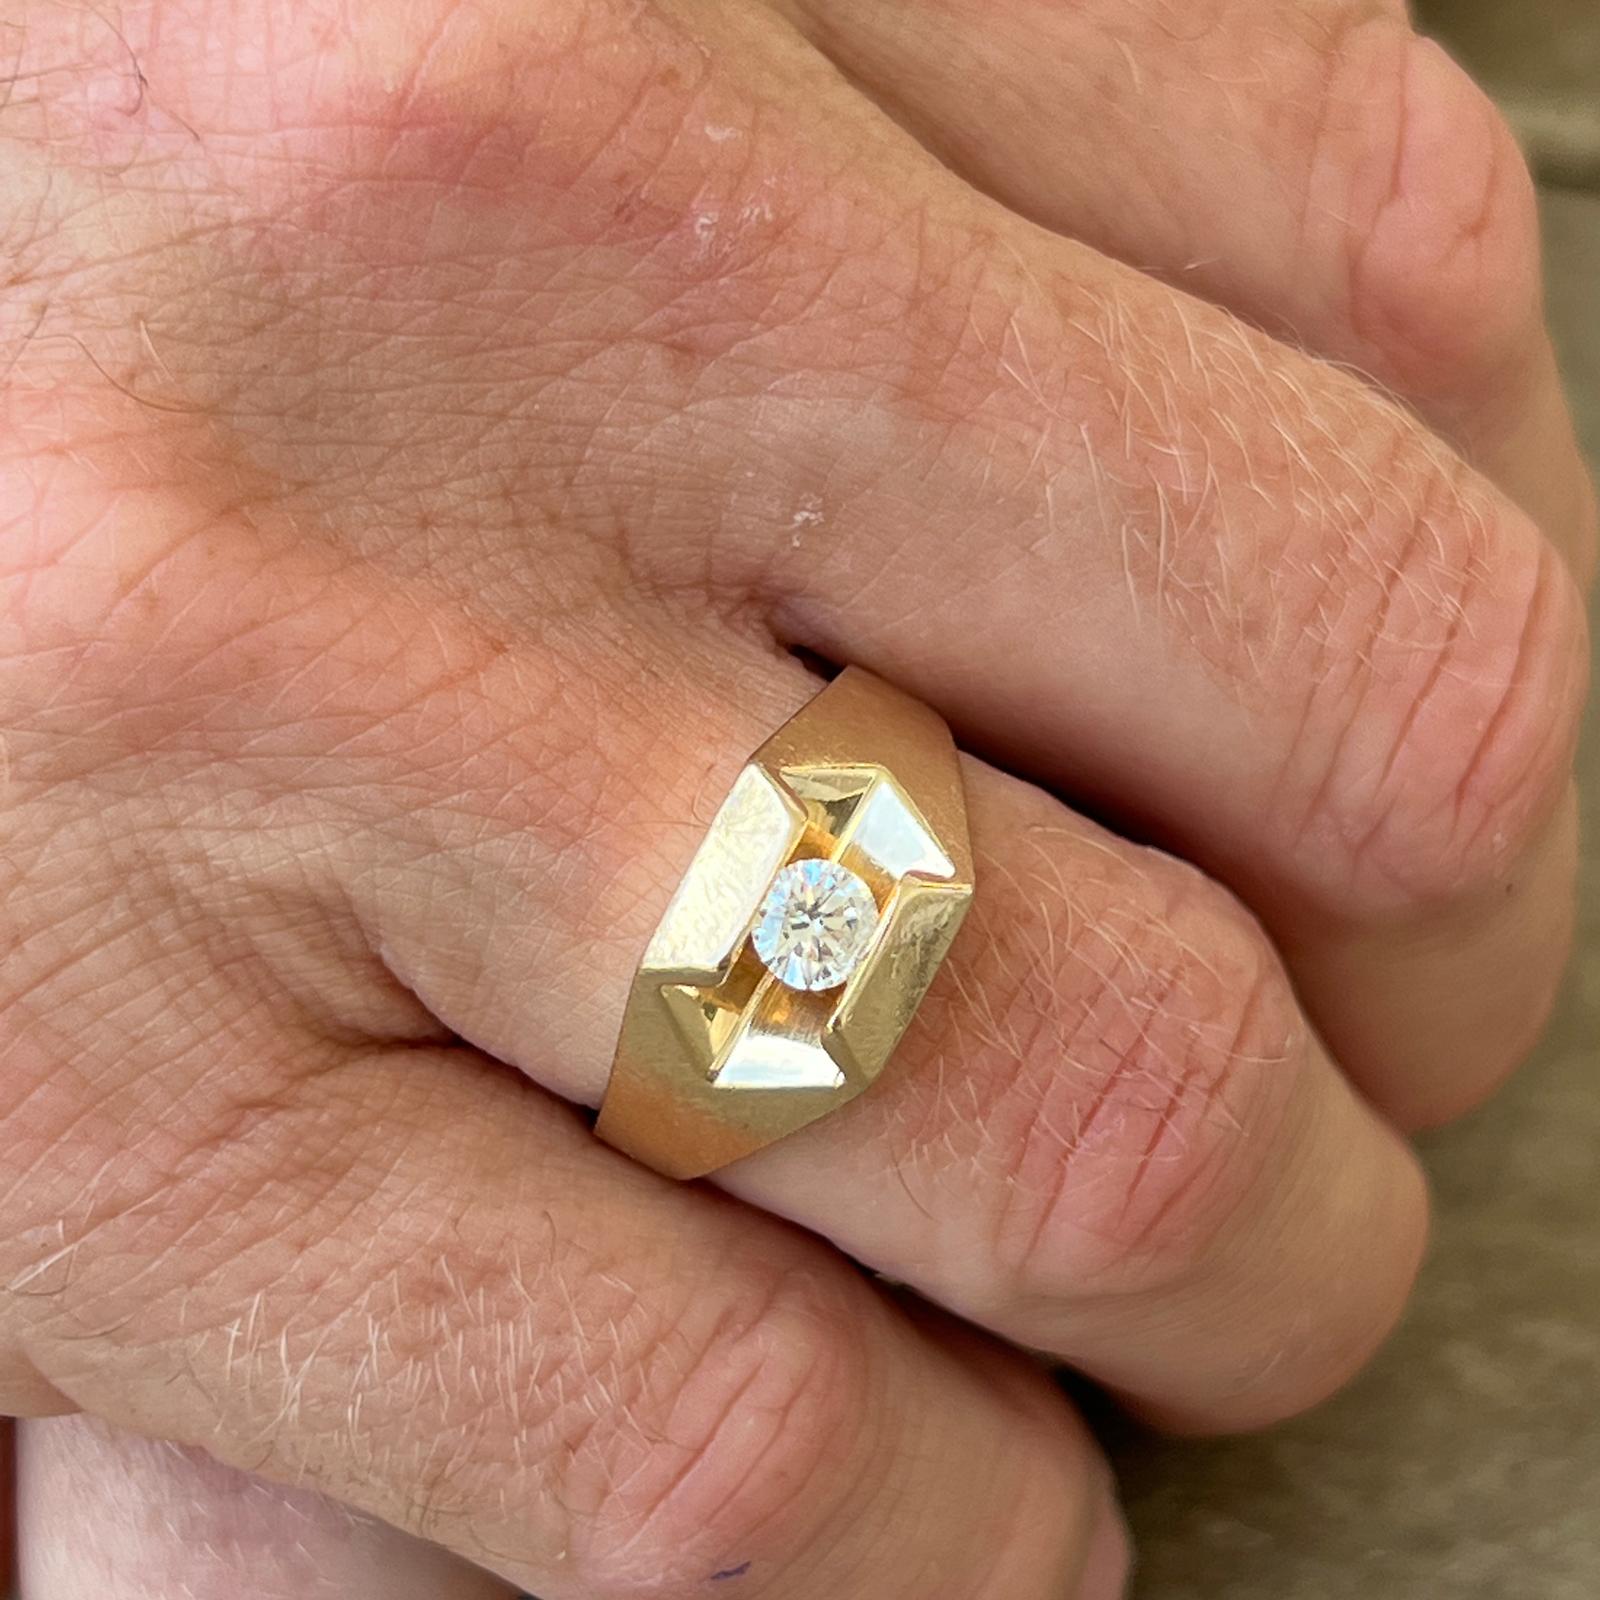 Gents diamond solitaire ring handcrafted in 14 karat yellow gold. The ring features a approximately .40 carat round brilliant cut diamond tension set between two gold ridges. The diamond is graded H-I color and SI clarity.  The ring measures 12mm in